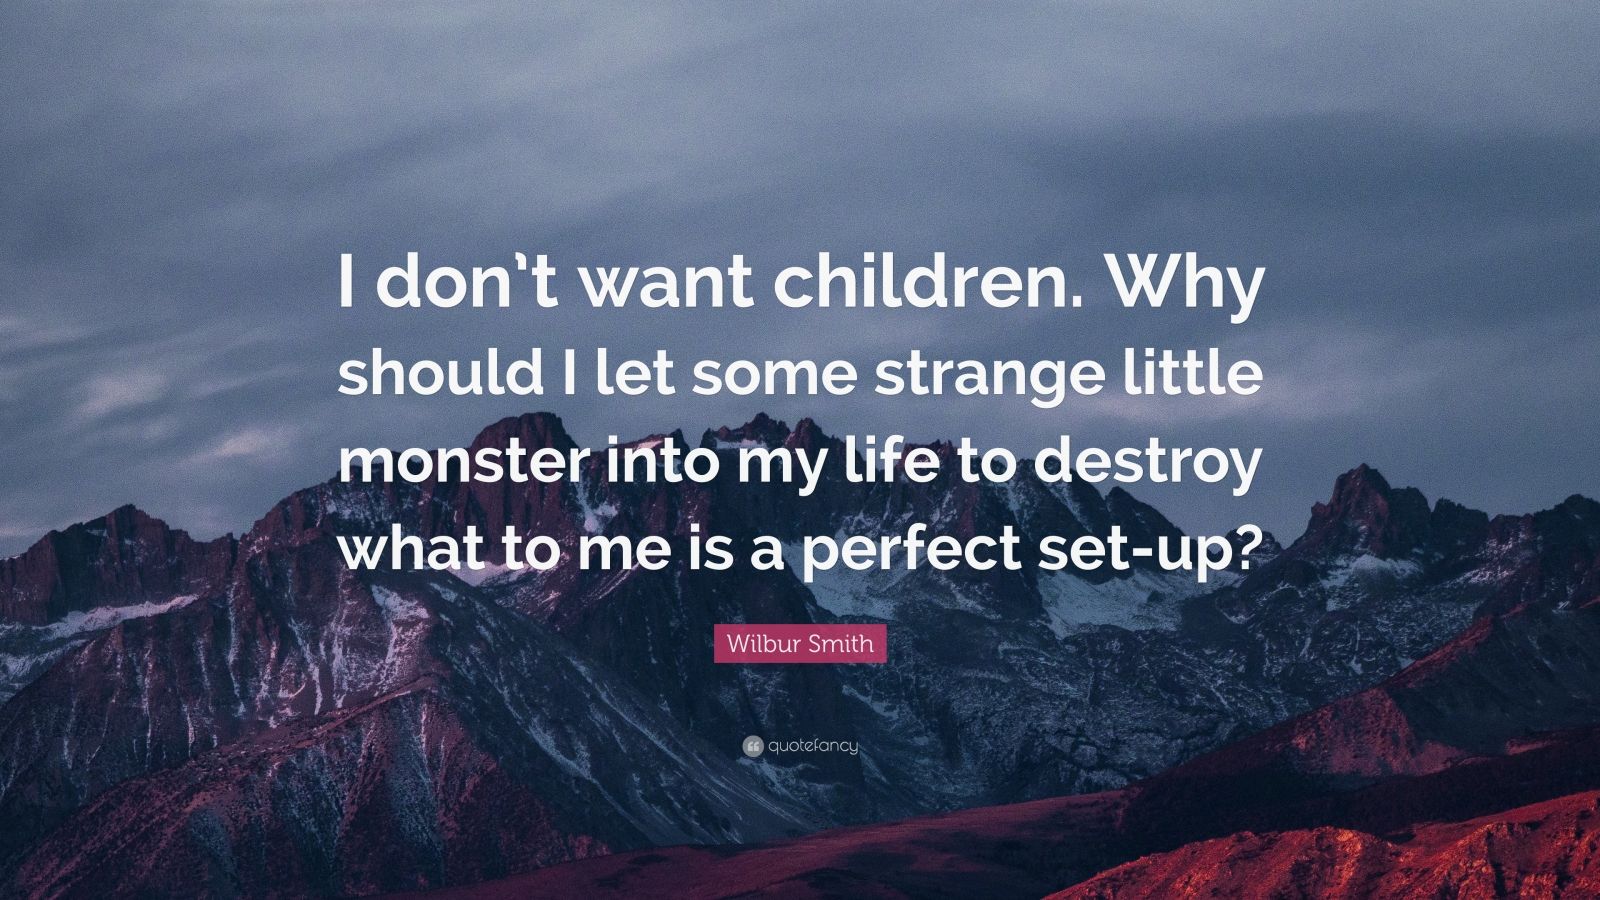 Wilbur Smith Quote: “I don’t want children. Why should I let some ...